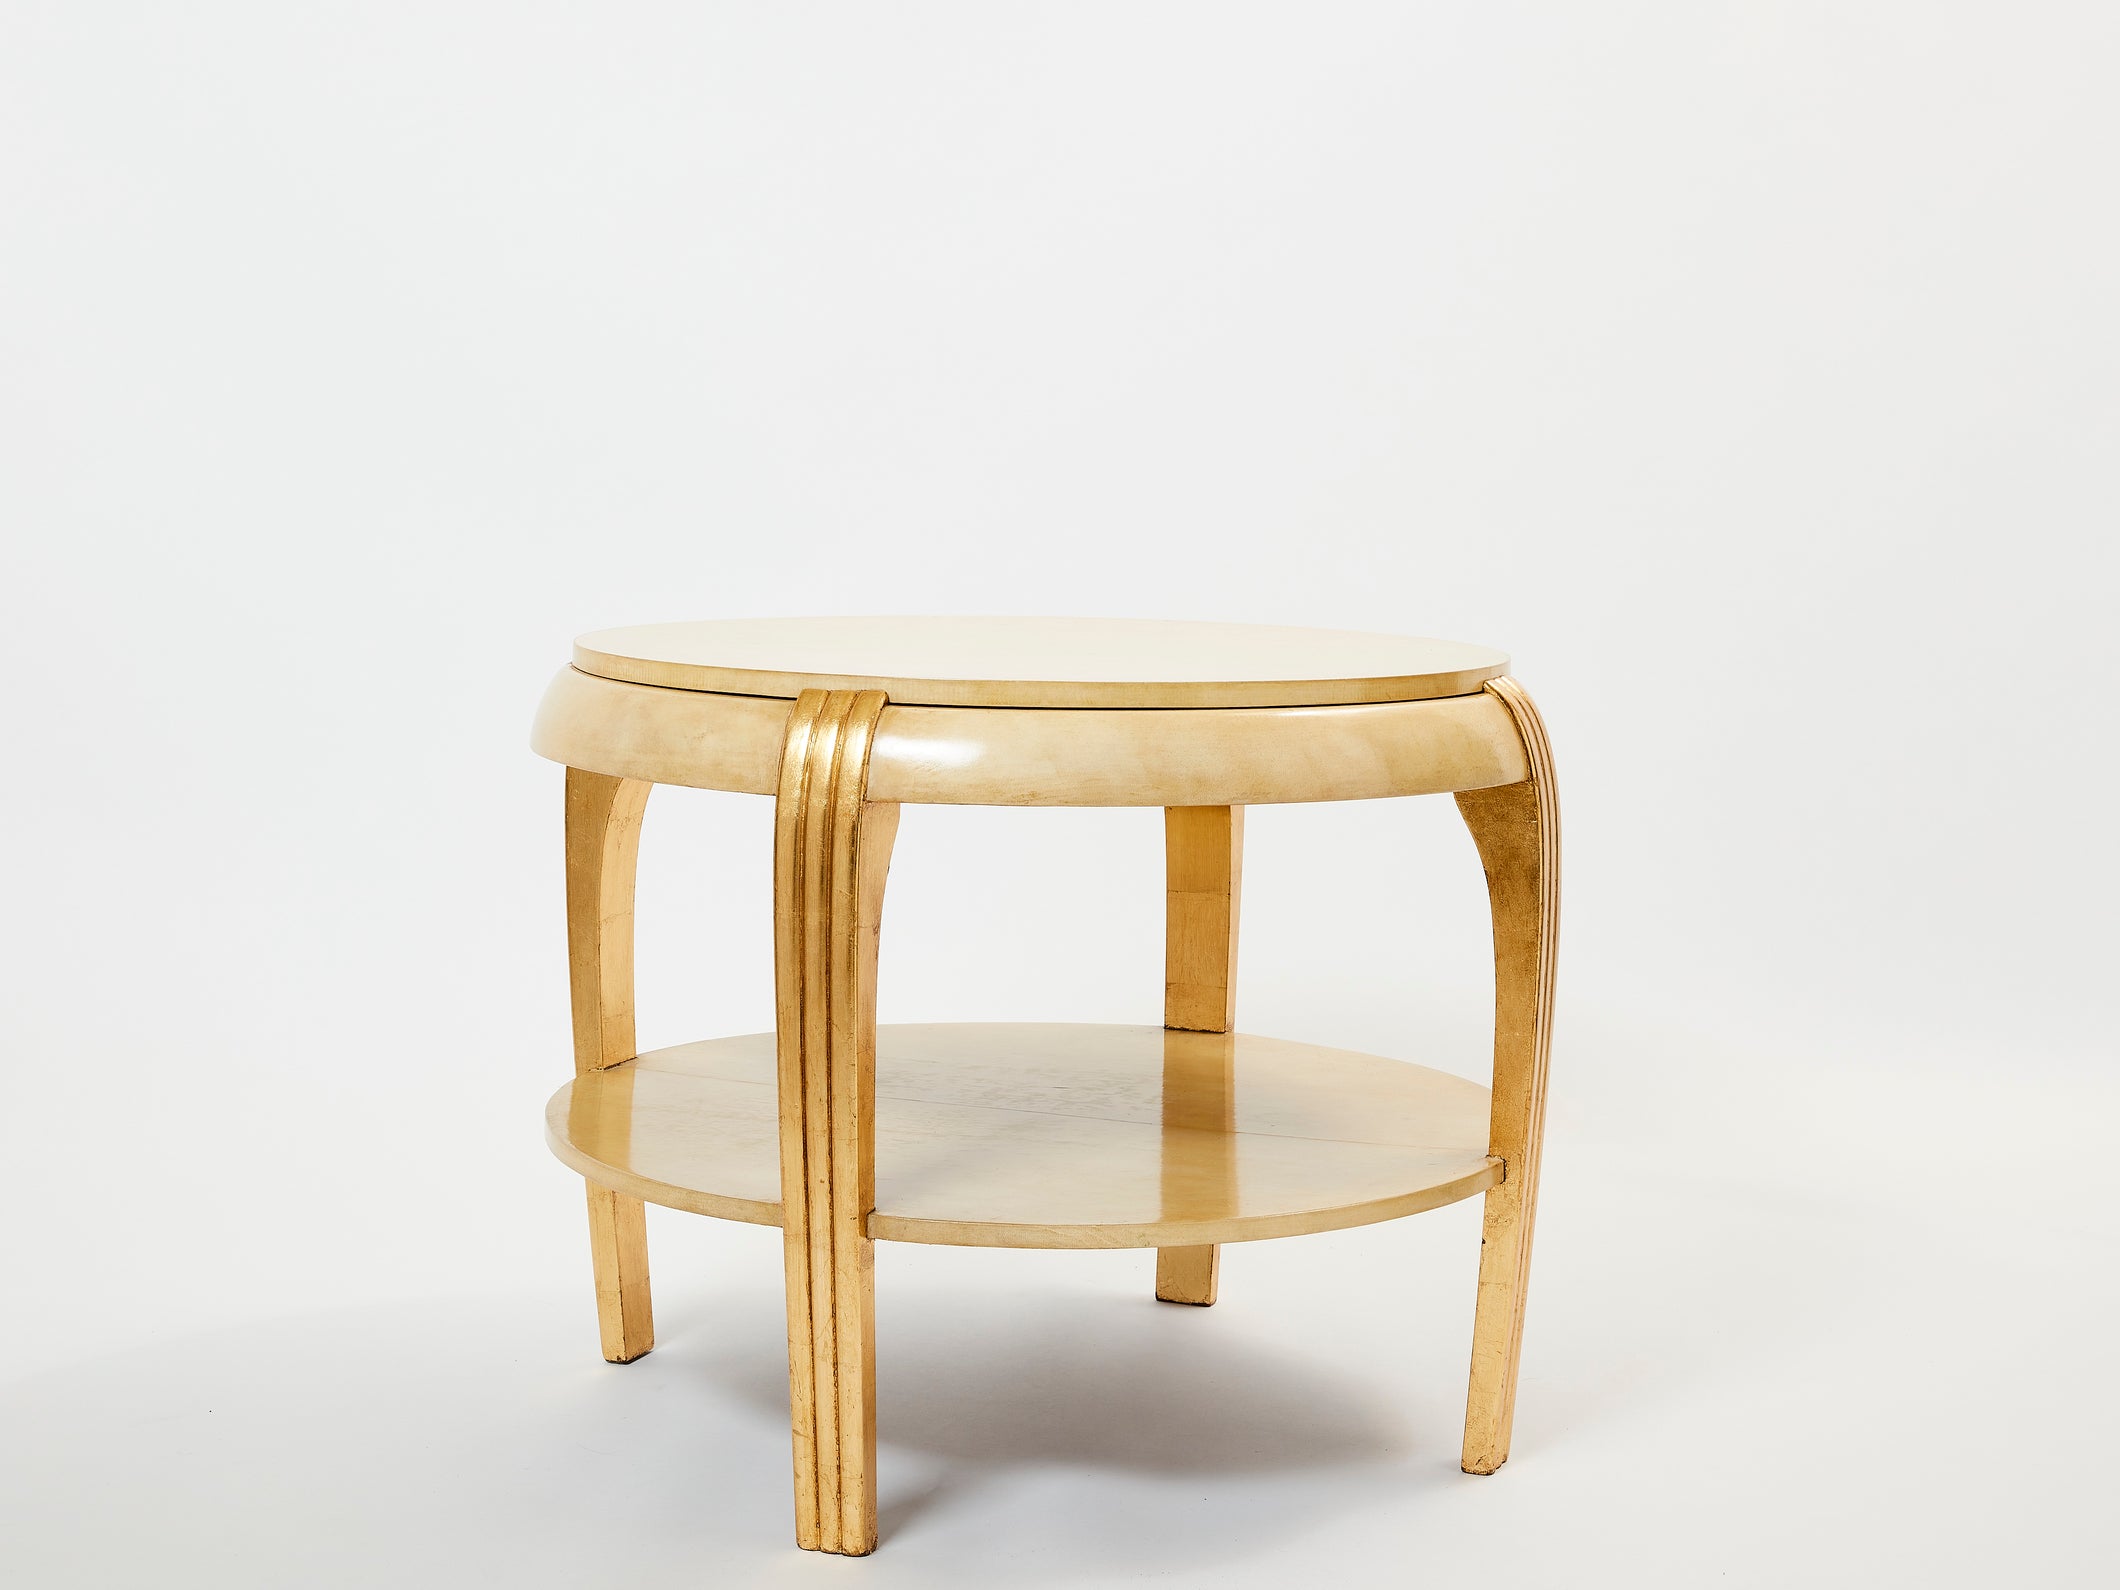 Gilded wood and parchment center table attr. Maurice Dufrène. 1930s